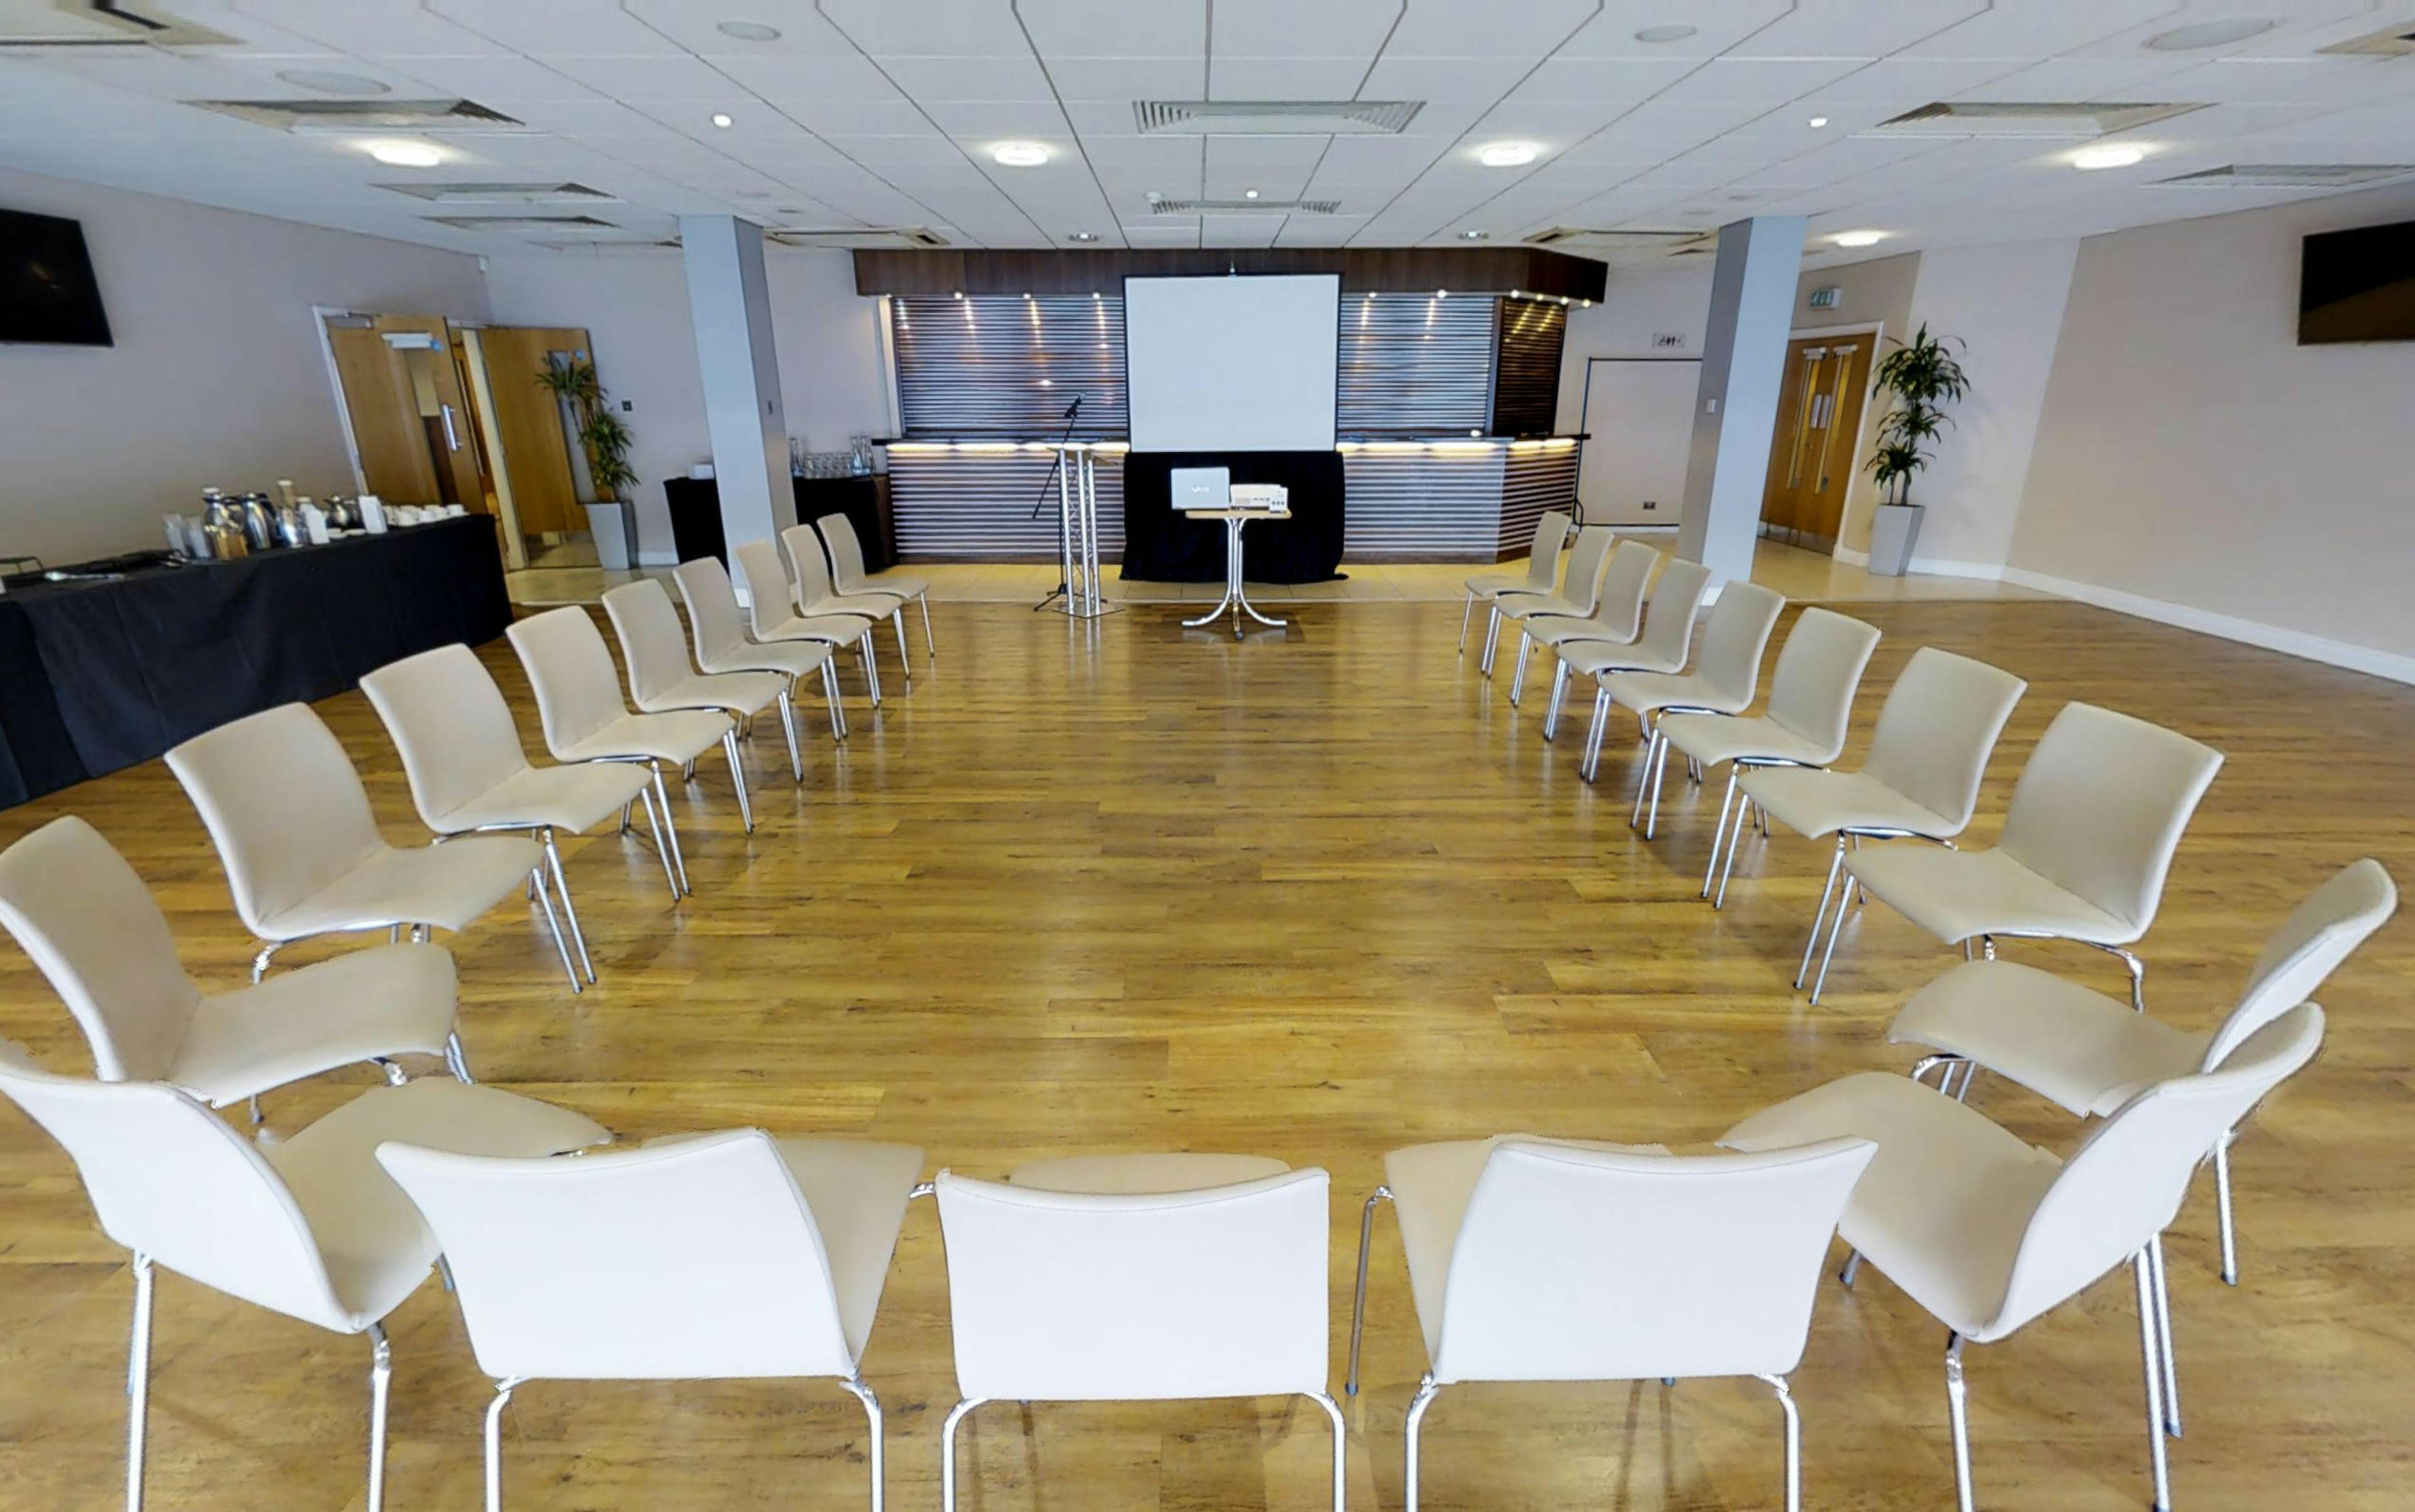 Reading FC Conference & Events  - Royal Suite image 1